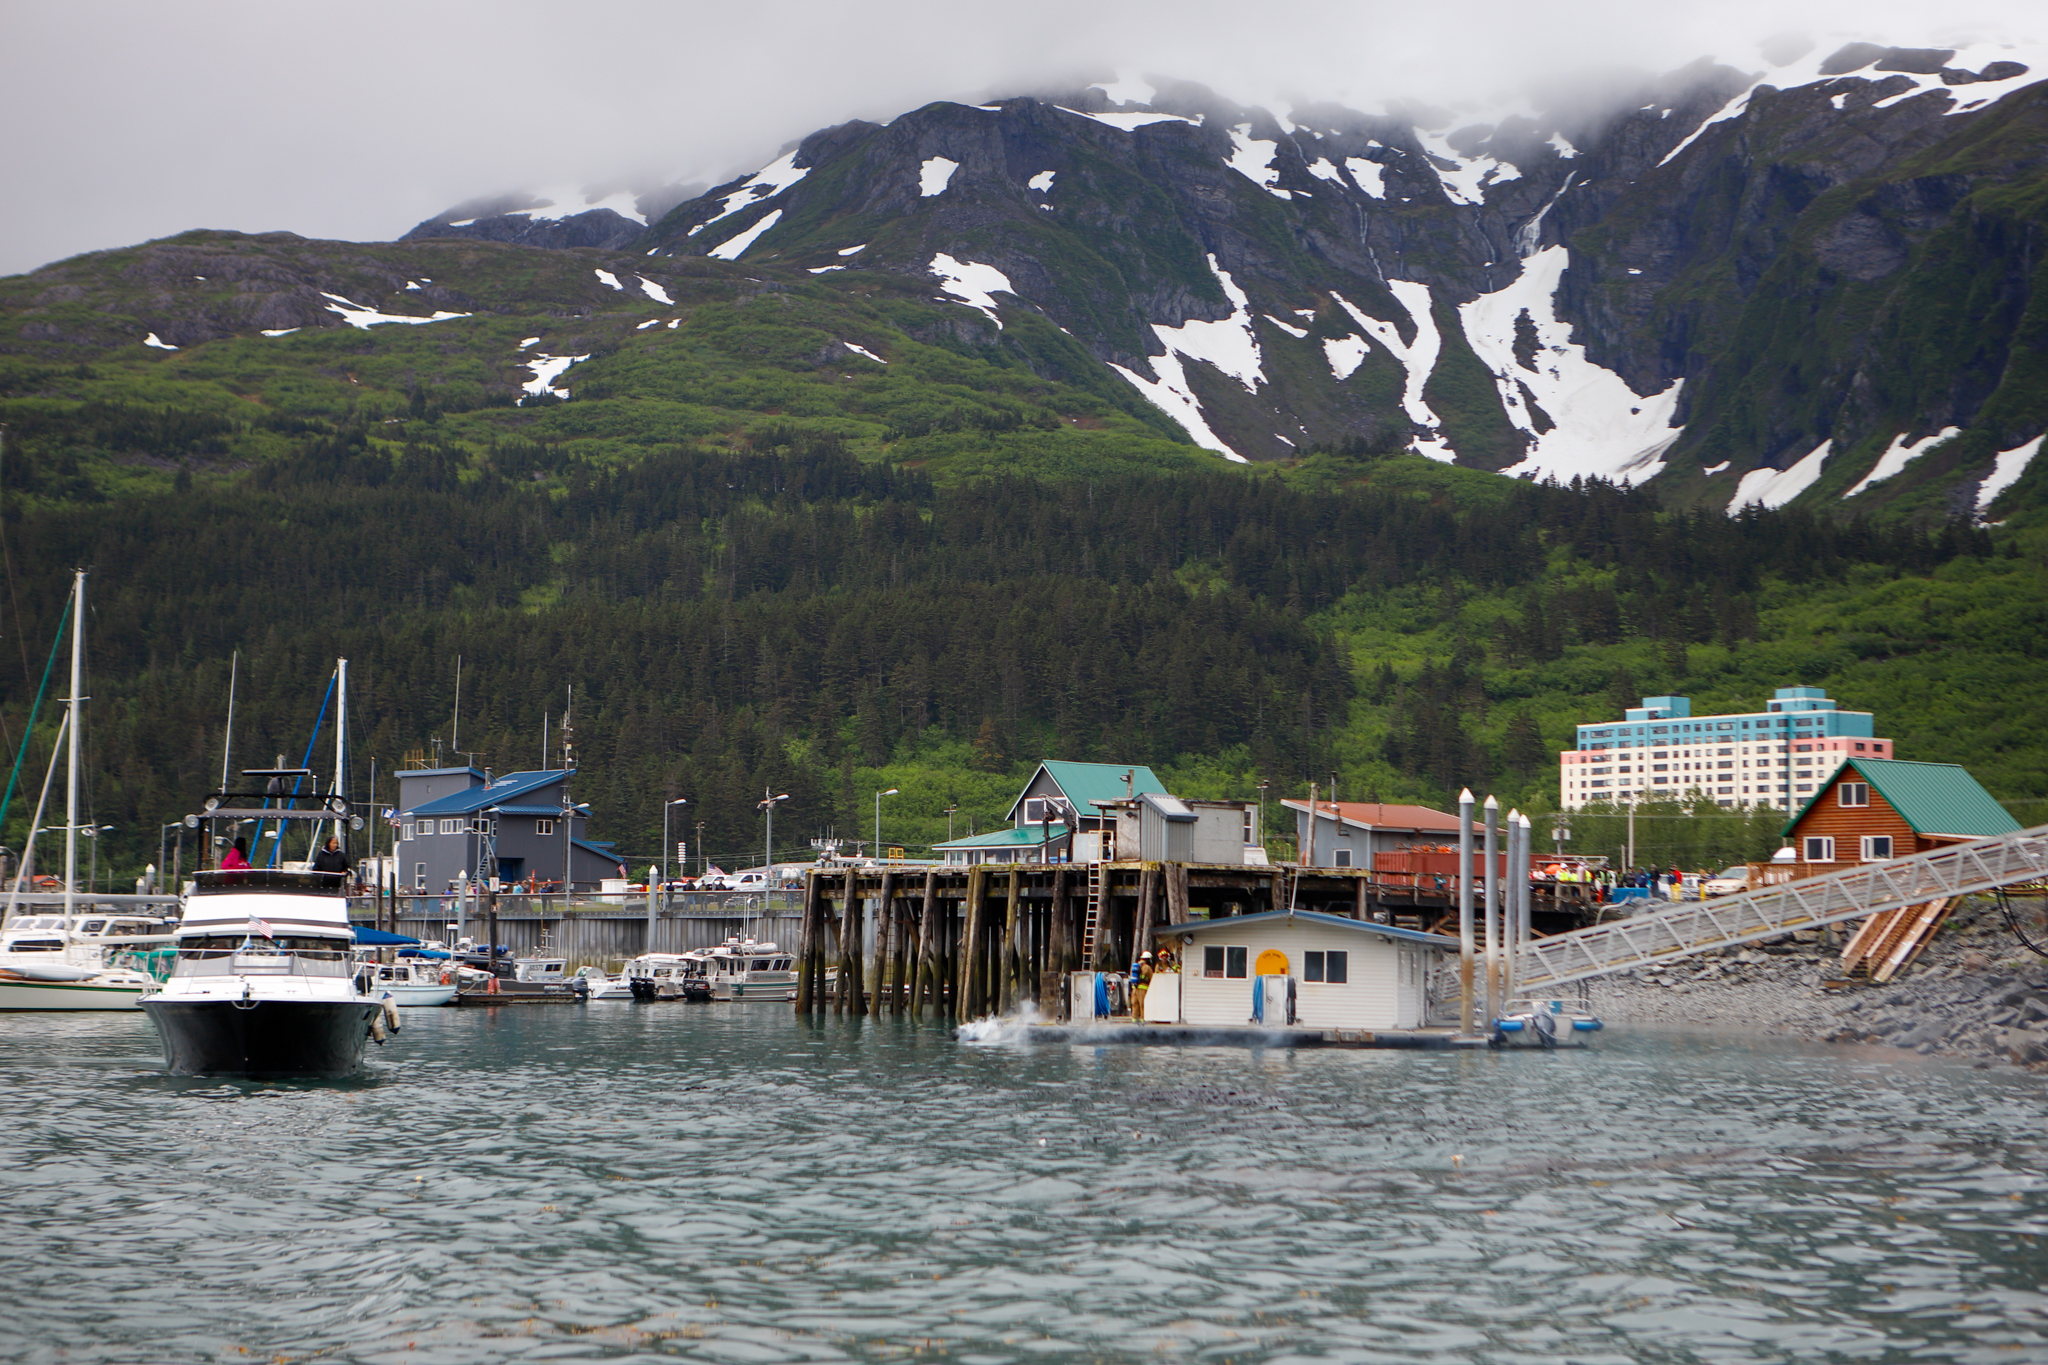 A wideshot of a boat harbor in front of a snow-capped mountain with a small dock fire smoking.